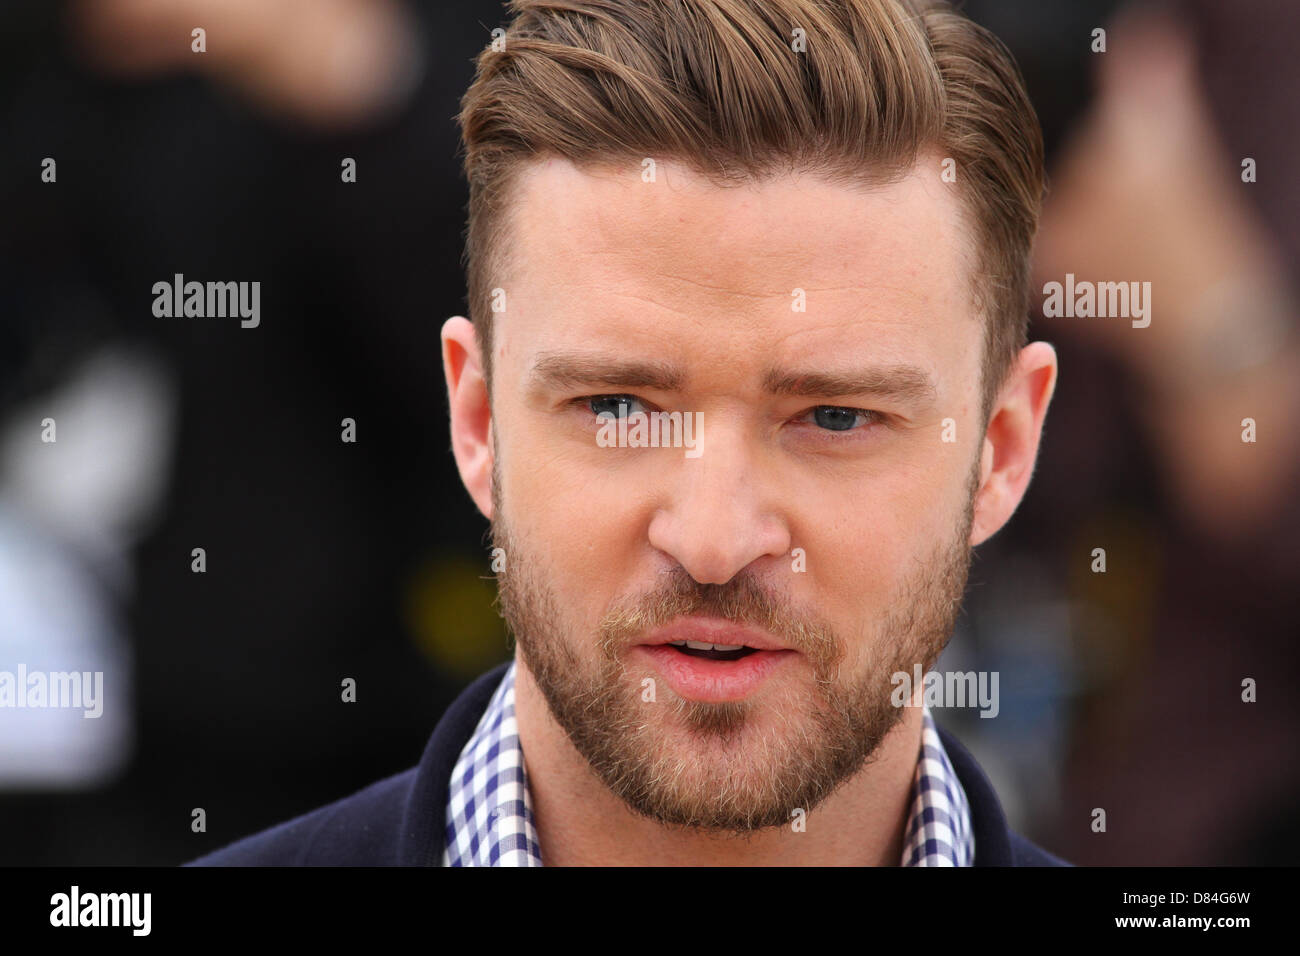 JUSTIN TIMBERLAKE INSIDE LLEWYN DAVIS. PHOTOCALL. CANNES FILM FESTIVAL 2013 CANNES  FRANCE 19 May 2013 Stock Photo